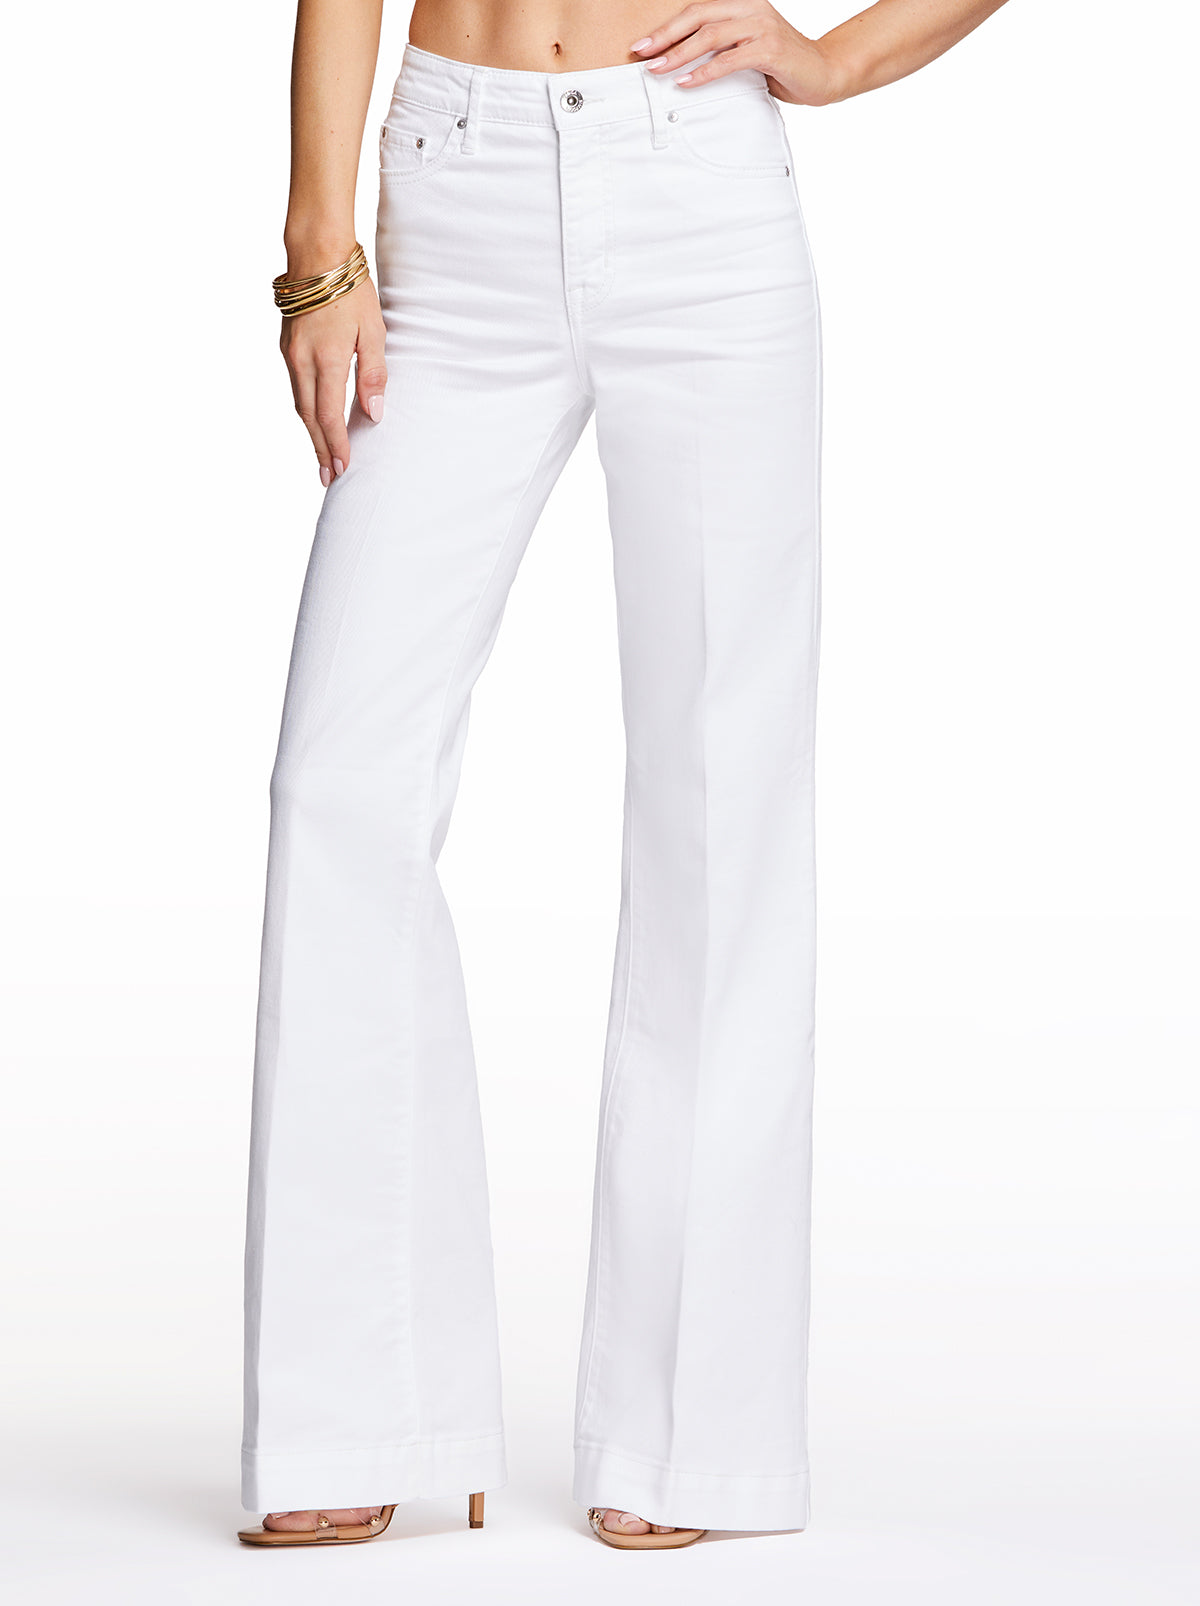 Love It White Flare Jeans